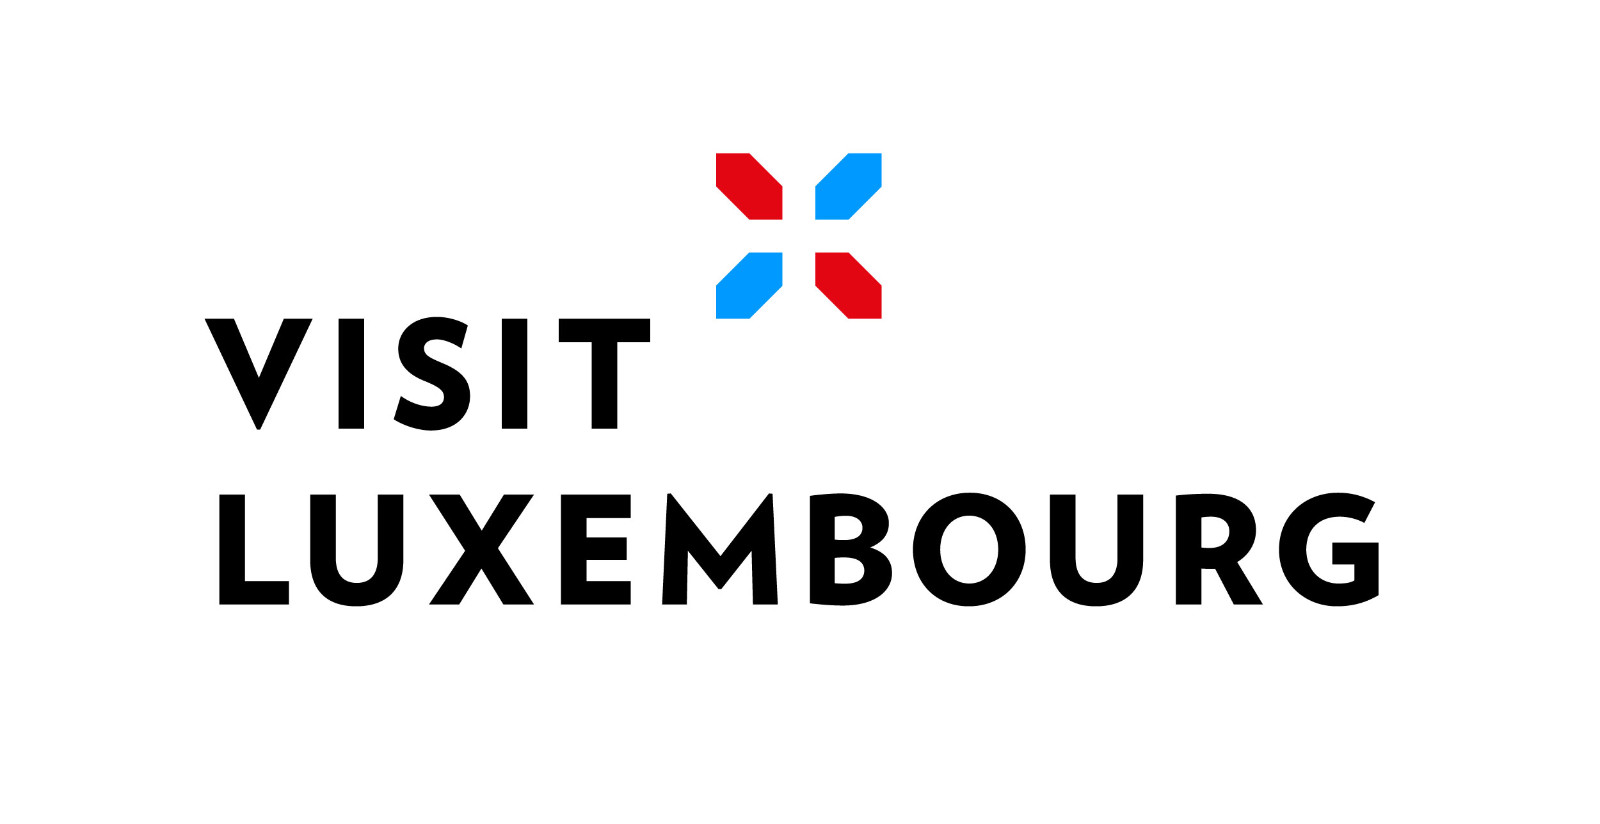 Luxembourg for Tourism